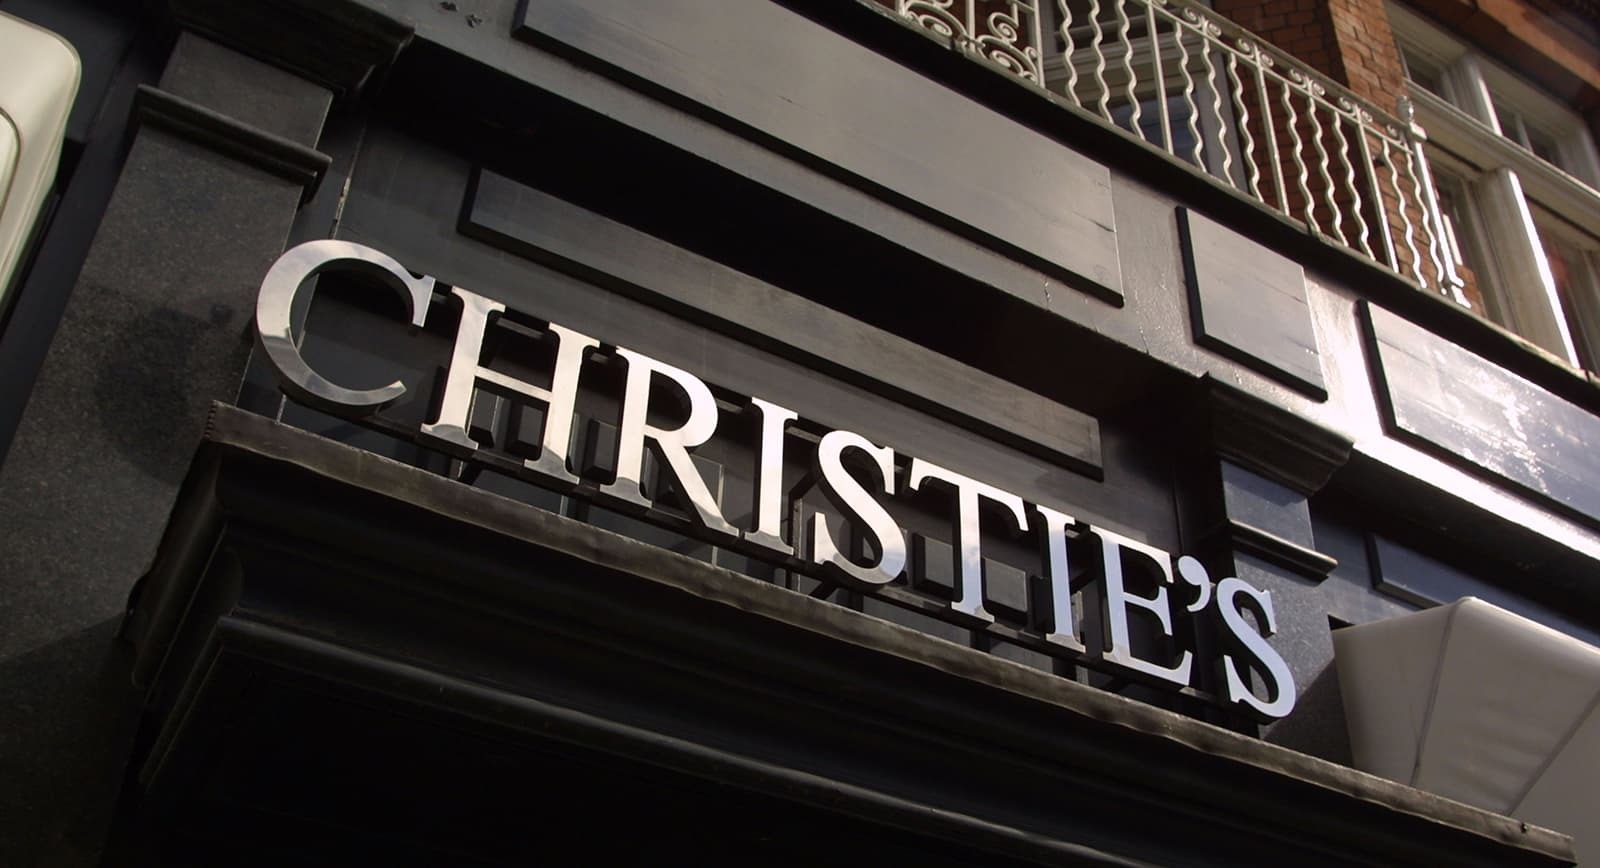 Christie's auction house whose Geneva Magnificent Jewels auction is in May